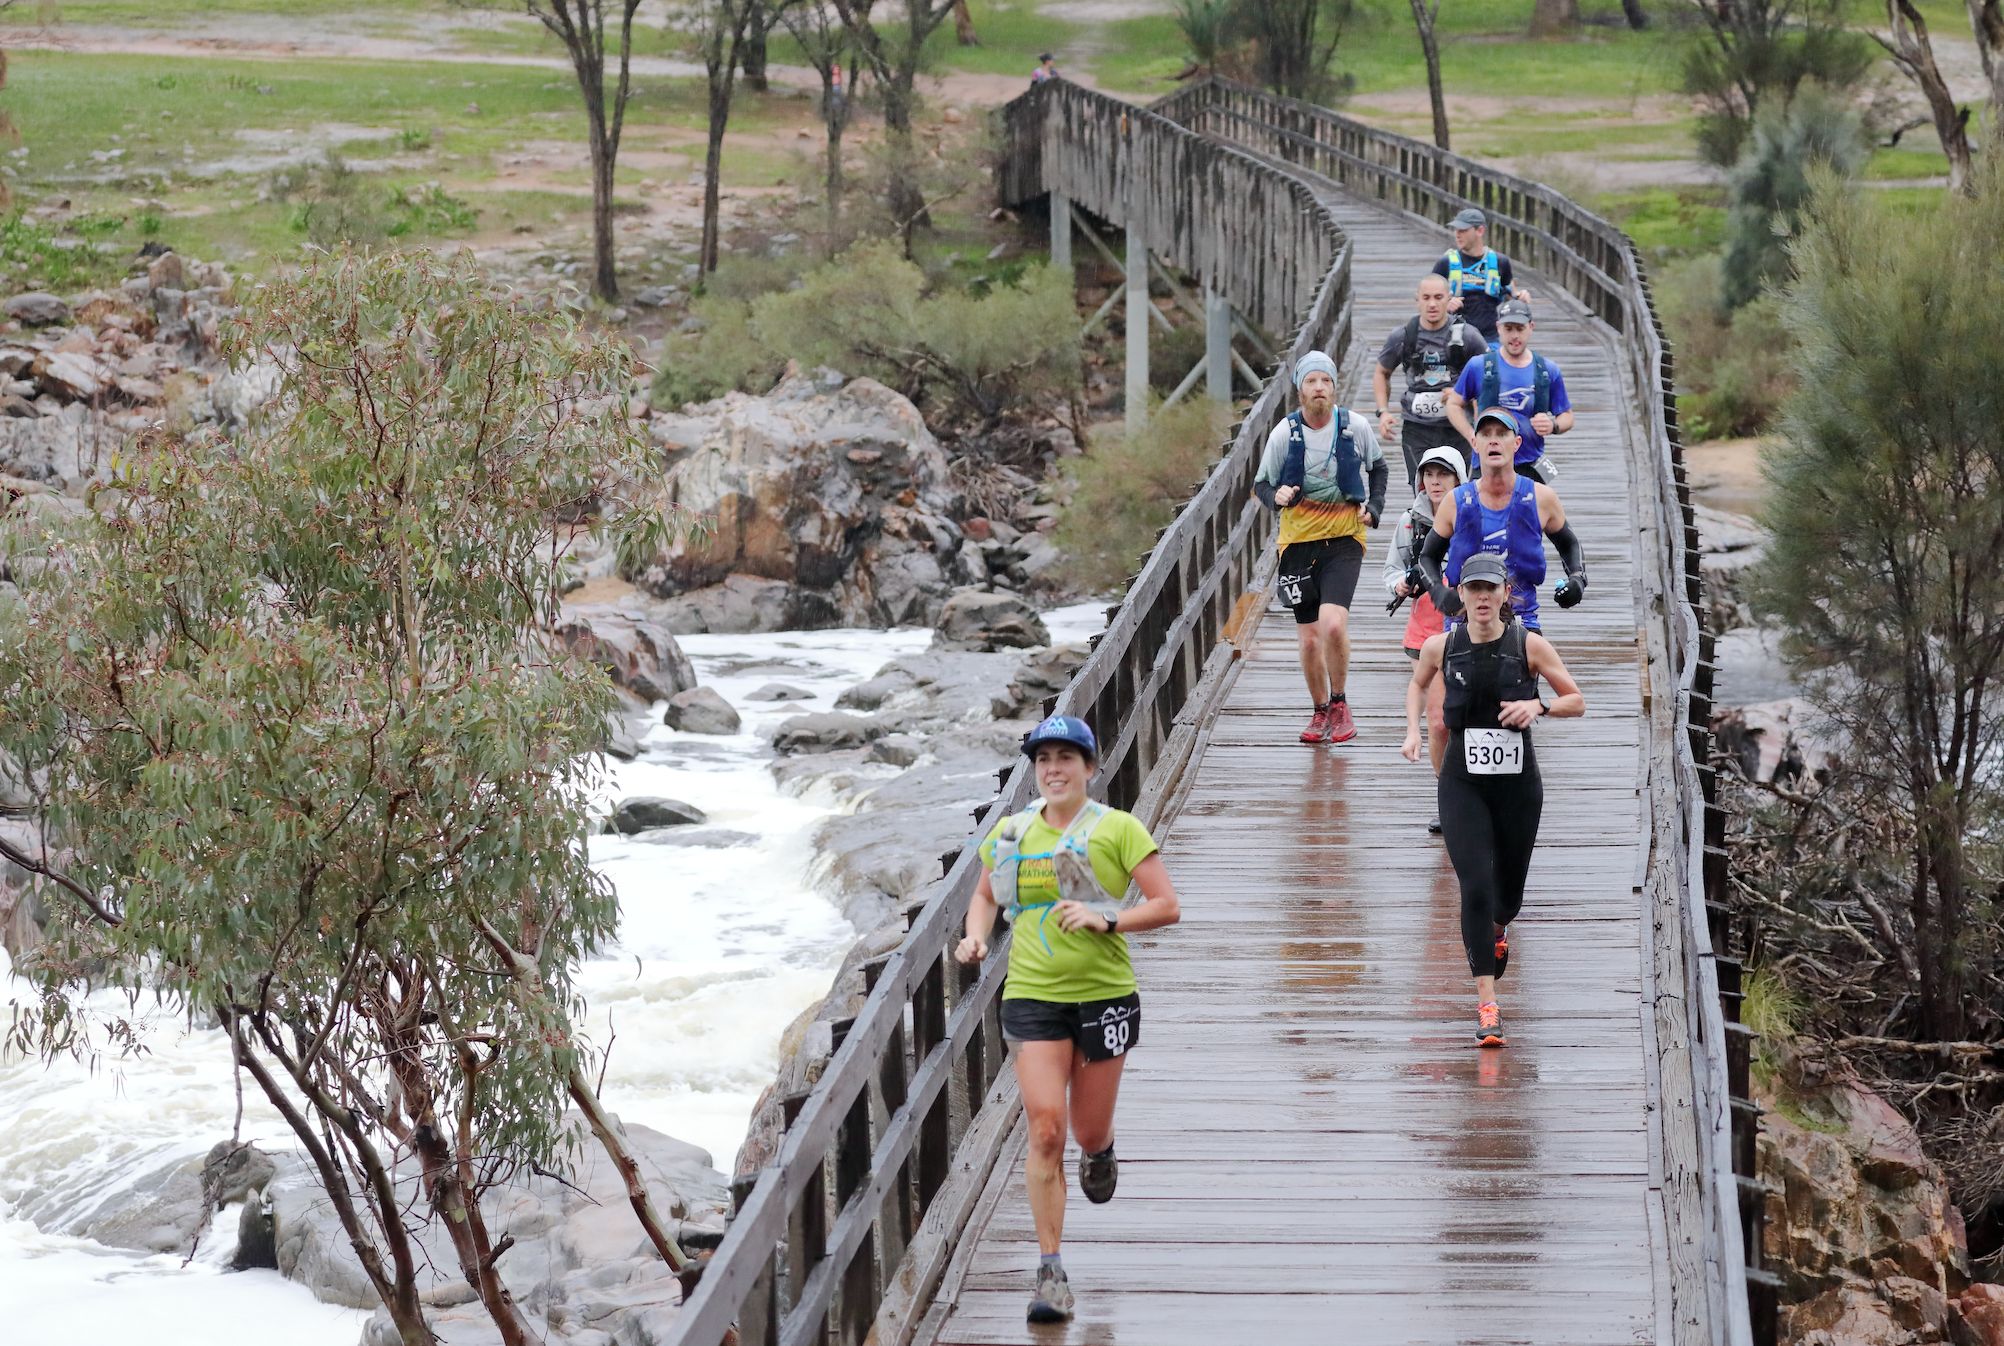 Participants crossing Bell’s Rapids, part of the 65km course.